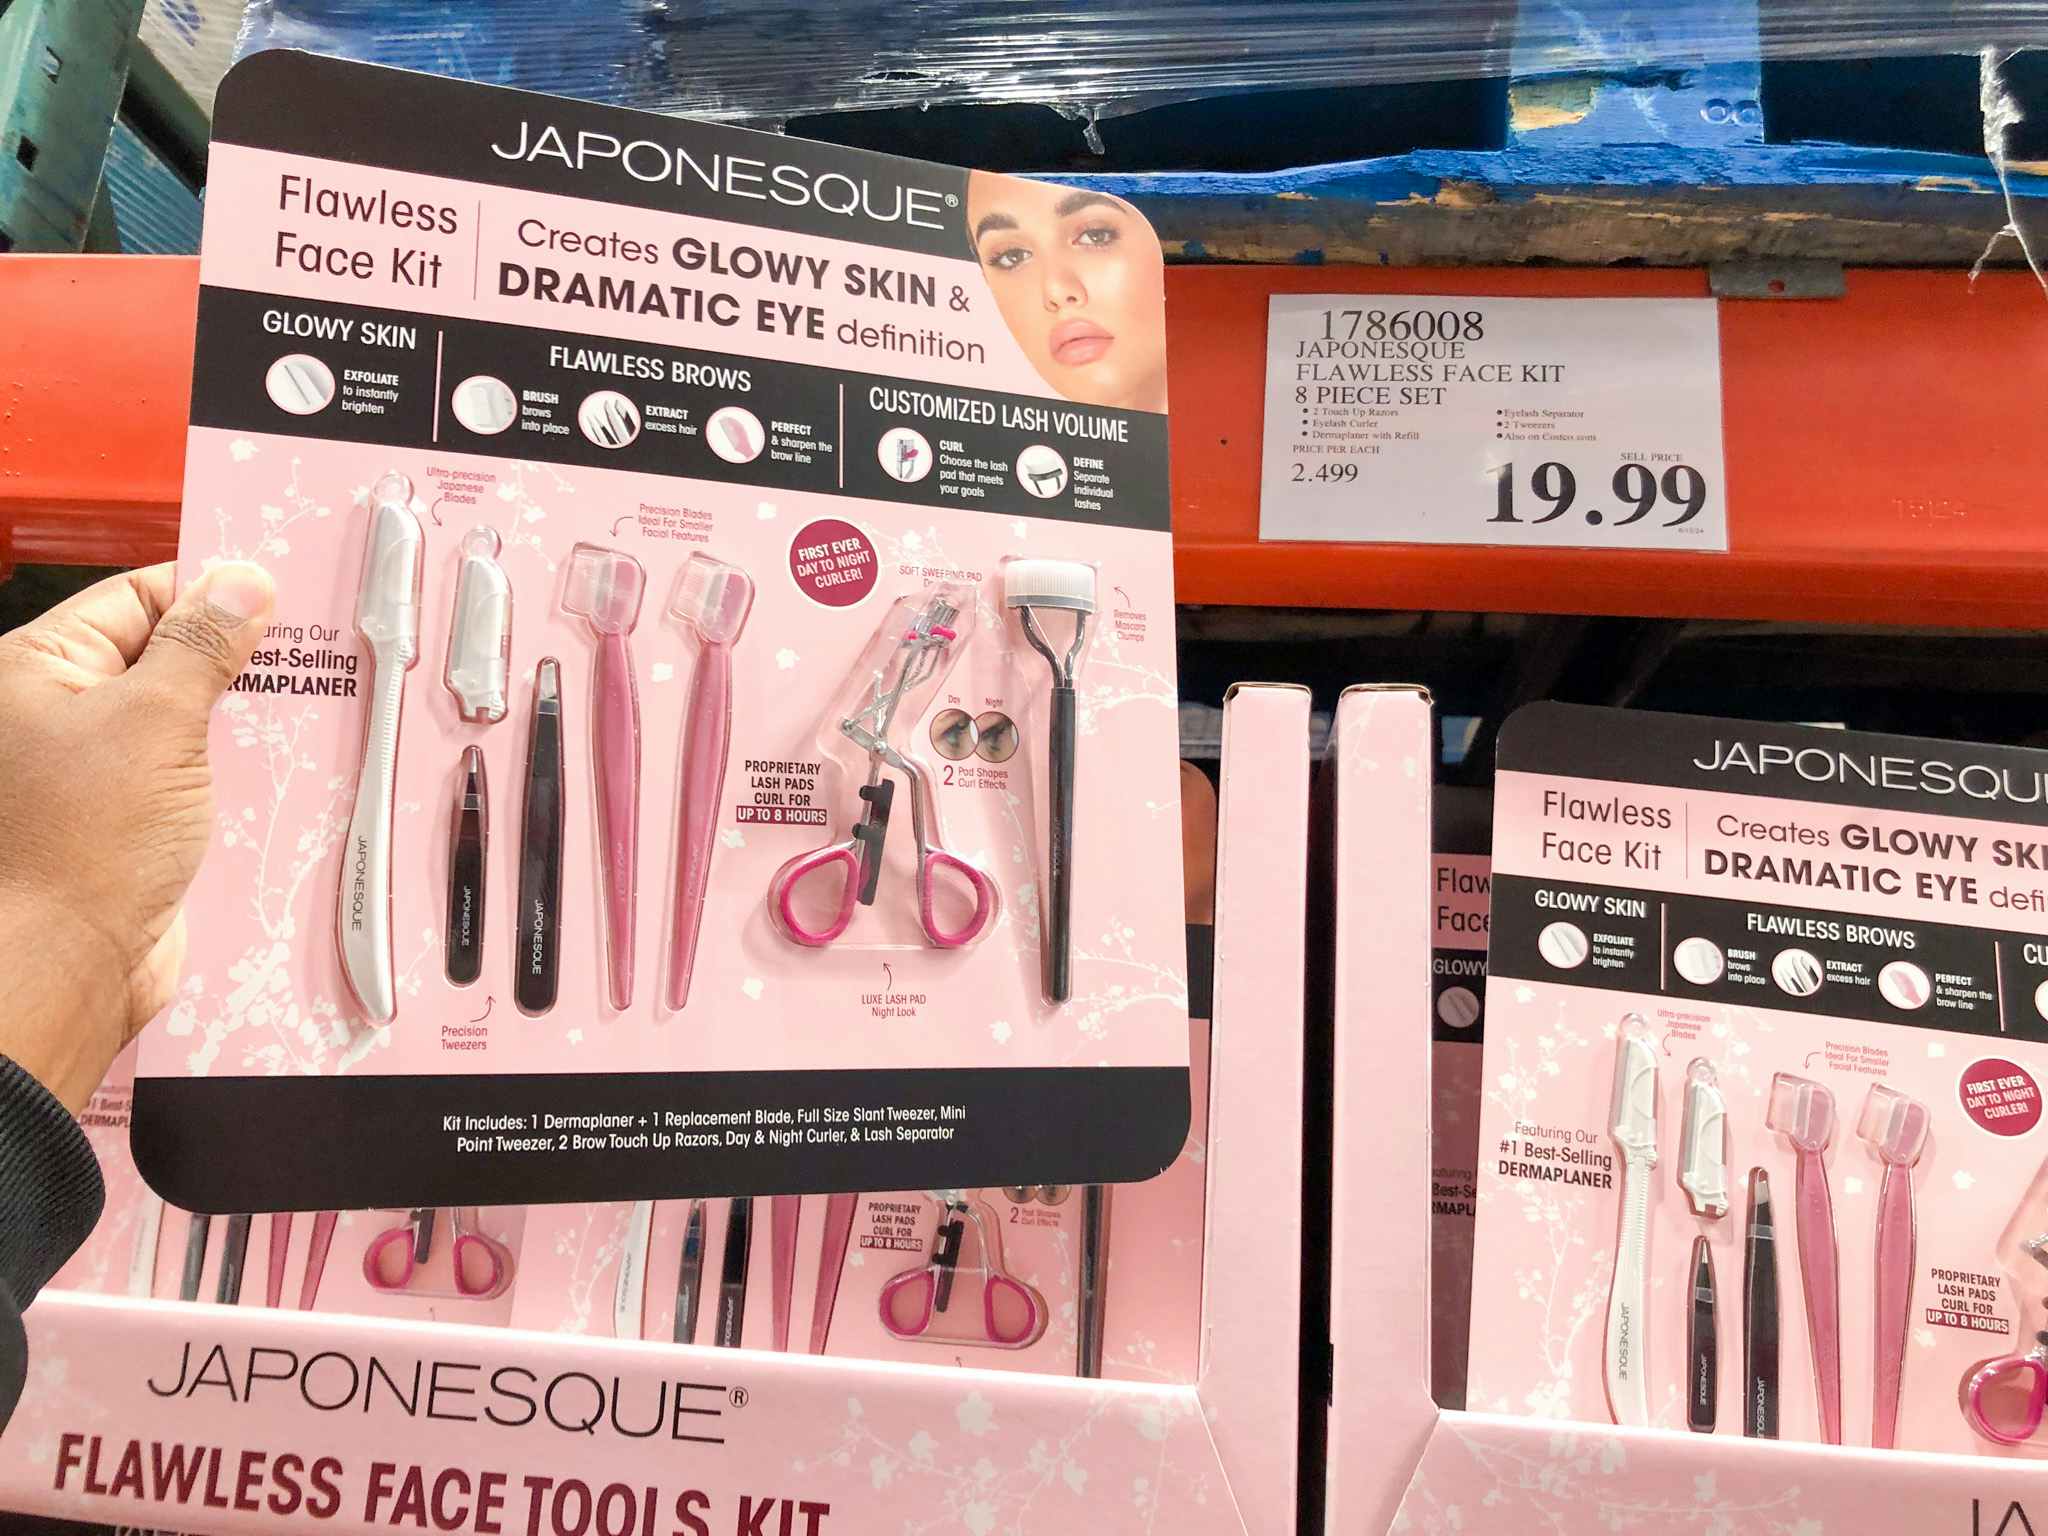 costco japonesque flawless face kit price